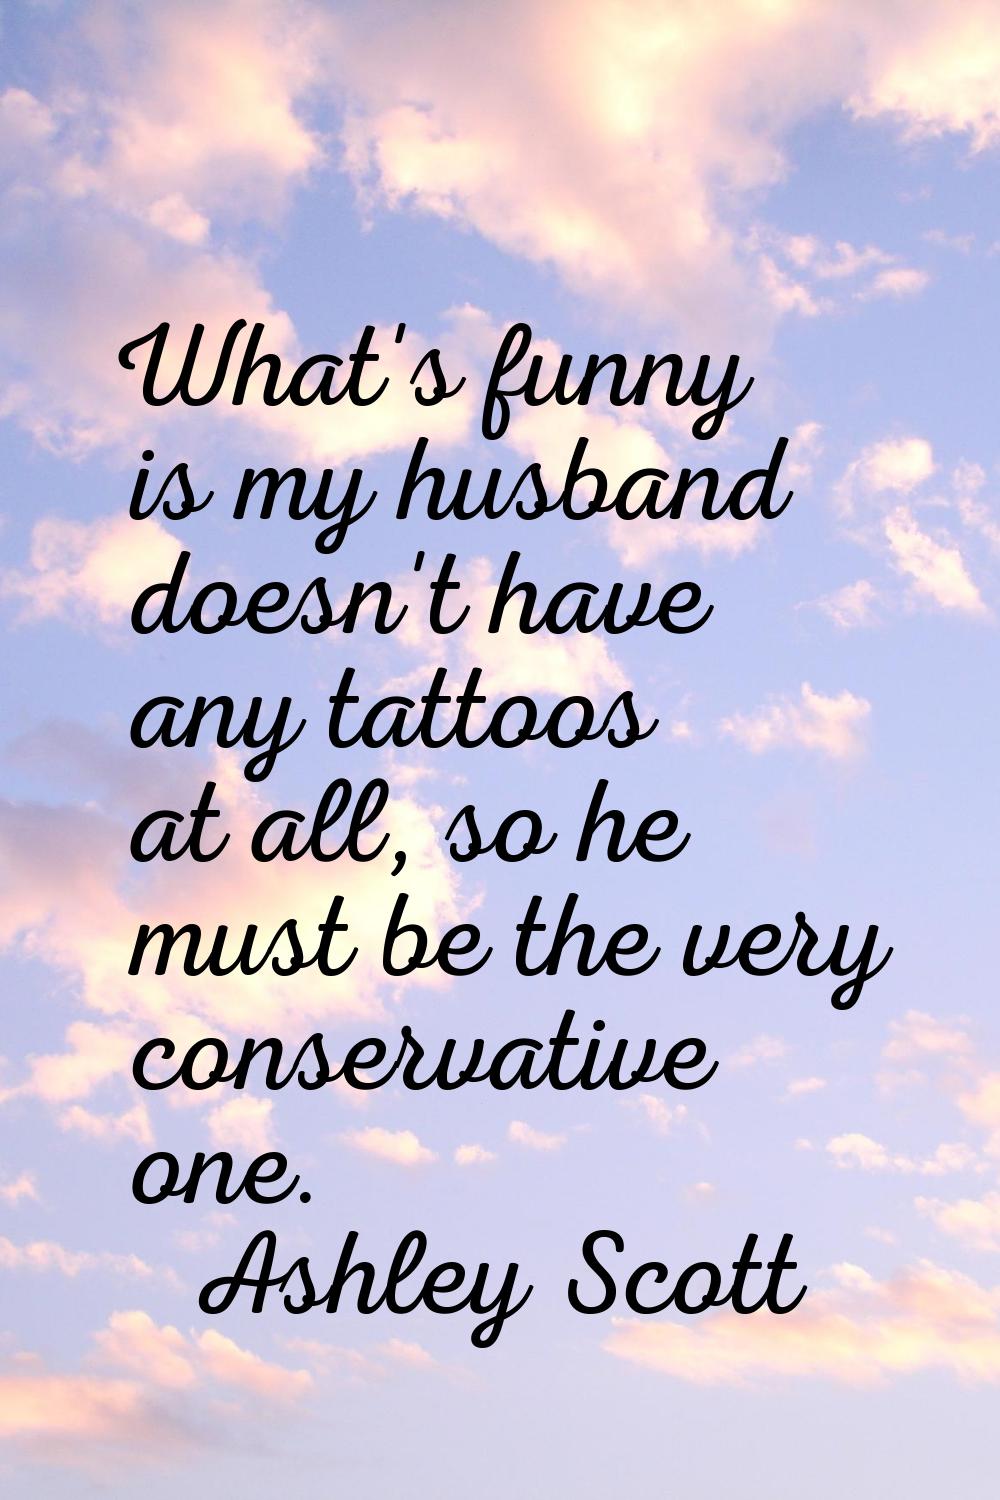 What's funny is my husband doesn't have any tattoos at all, so he must be the very conservative one